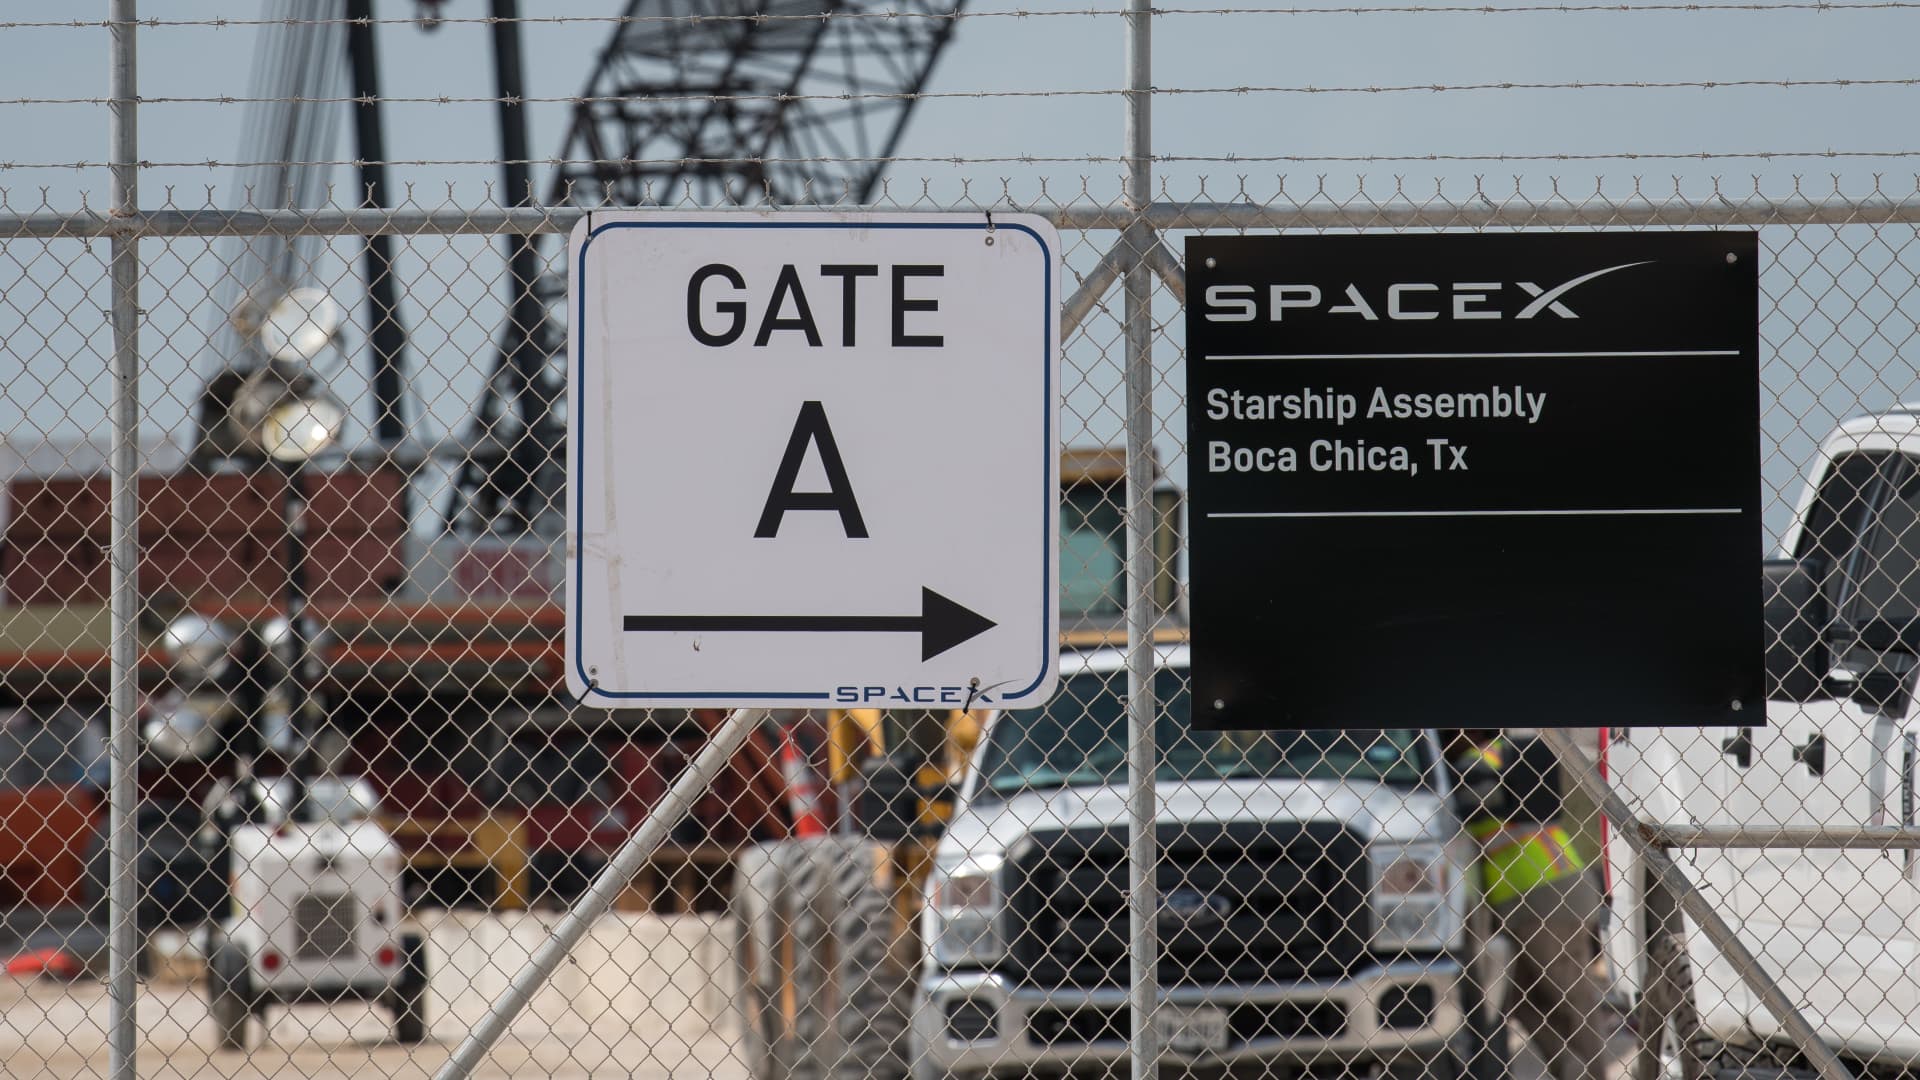 SpaceX hasn’t obtained environmental permits for ‘flame deflector’ system it’s testing in Texas